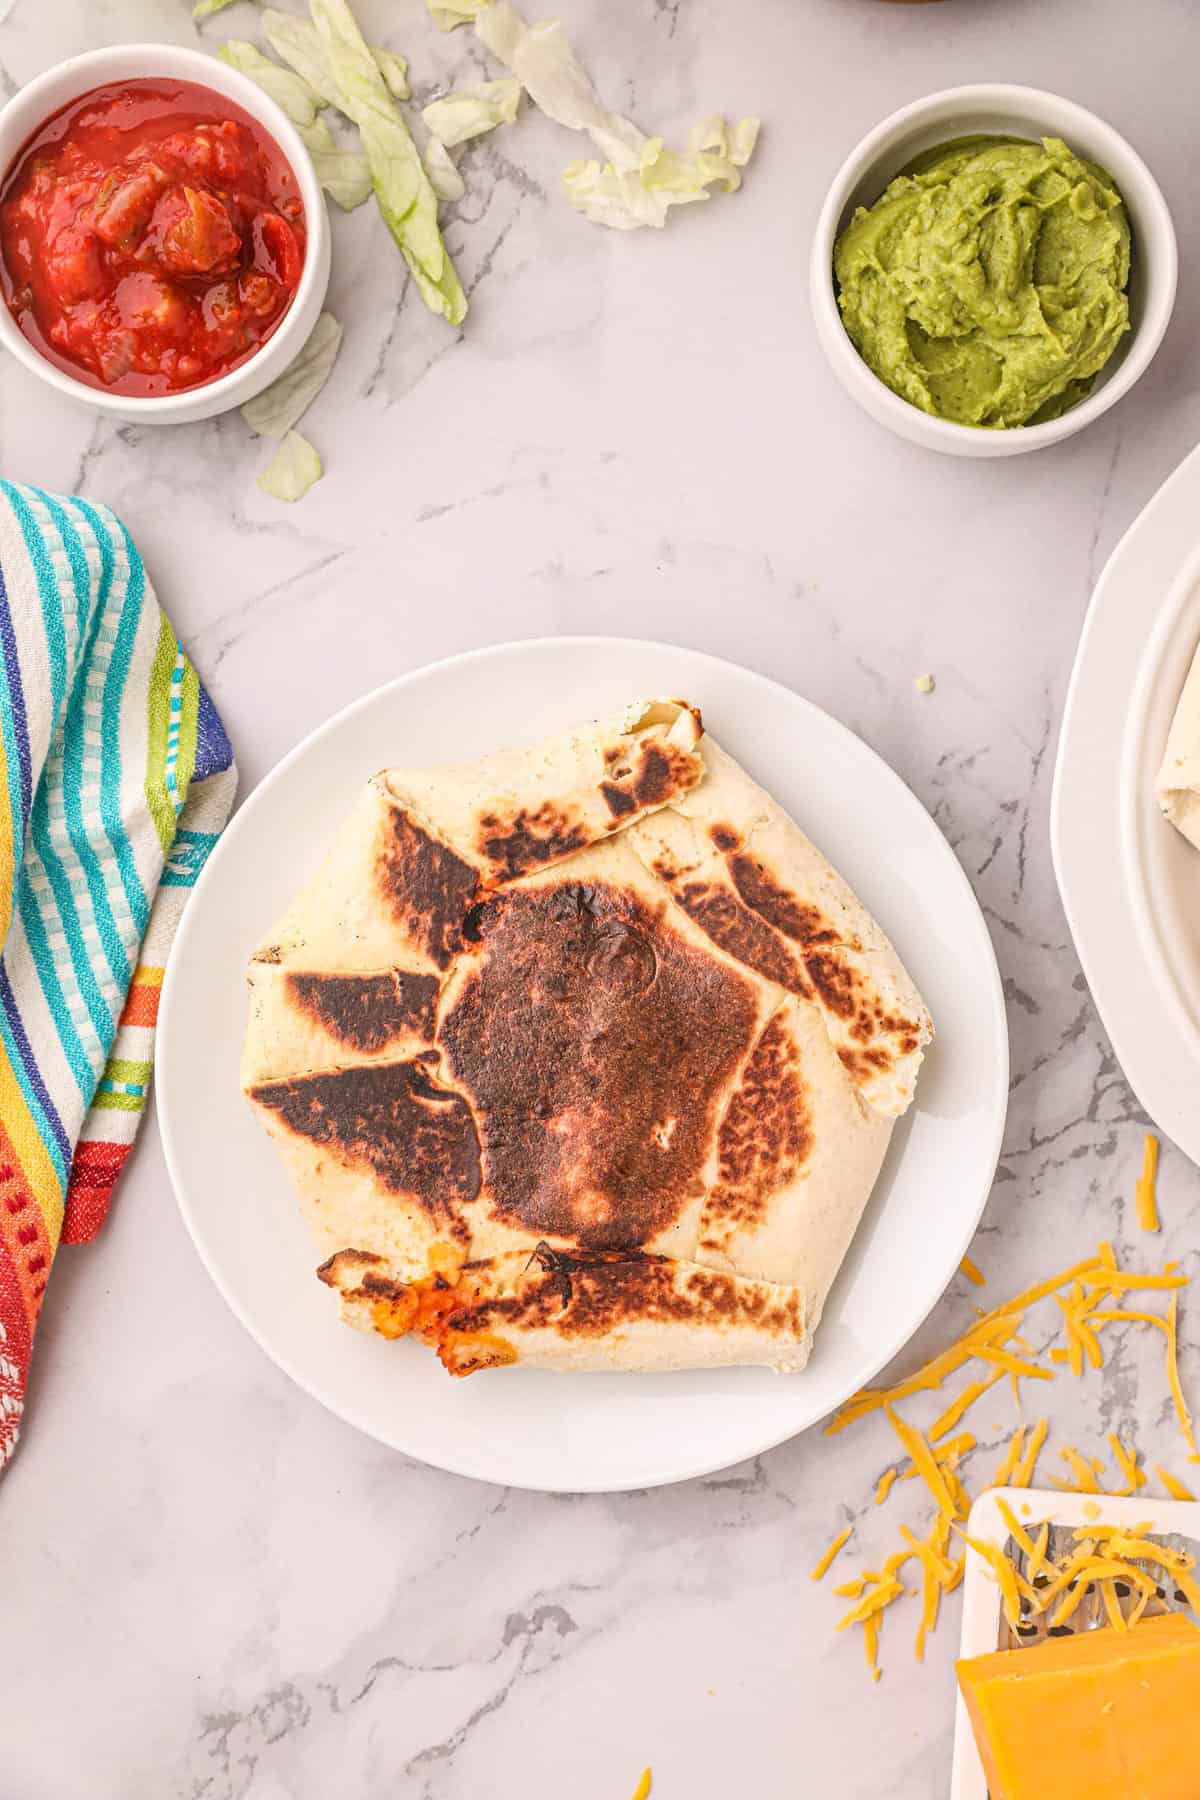 Blackstone Crunchwrap Hot Off the Griddle Ready to Top with Salsa, Guac, or Sour Cream